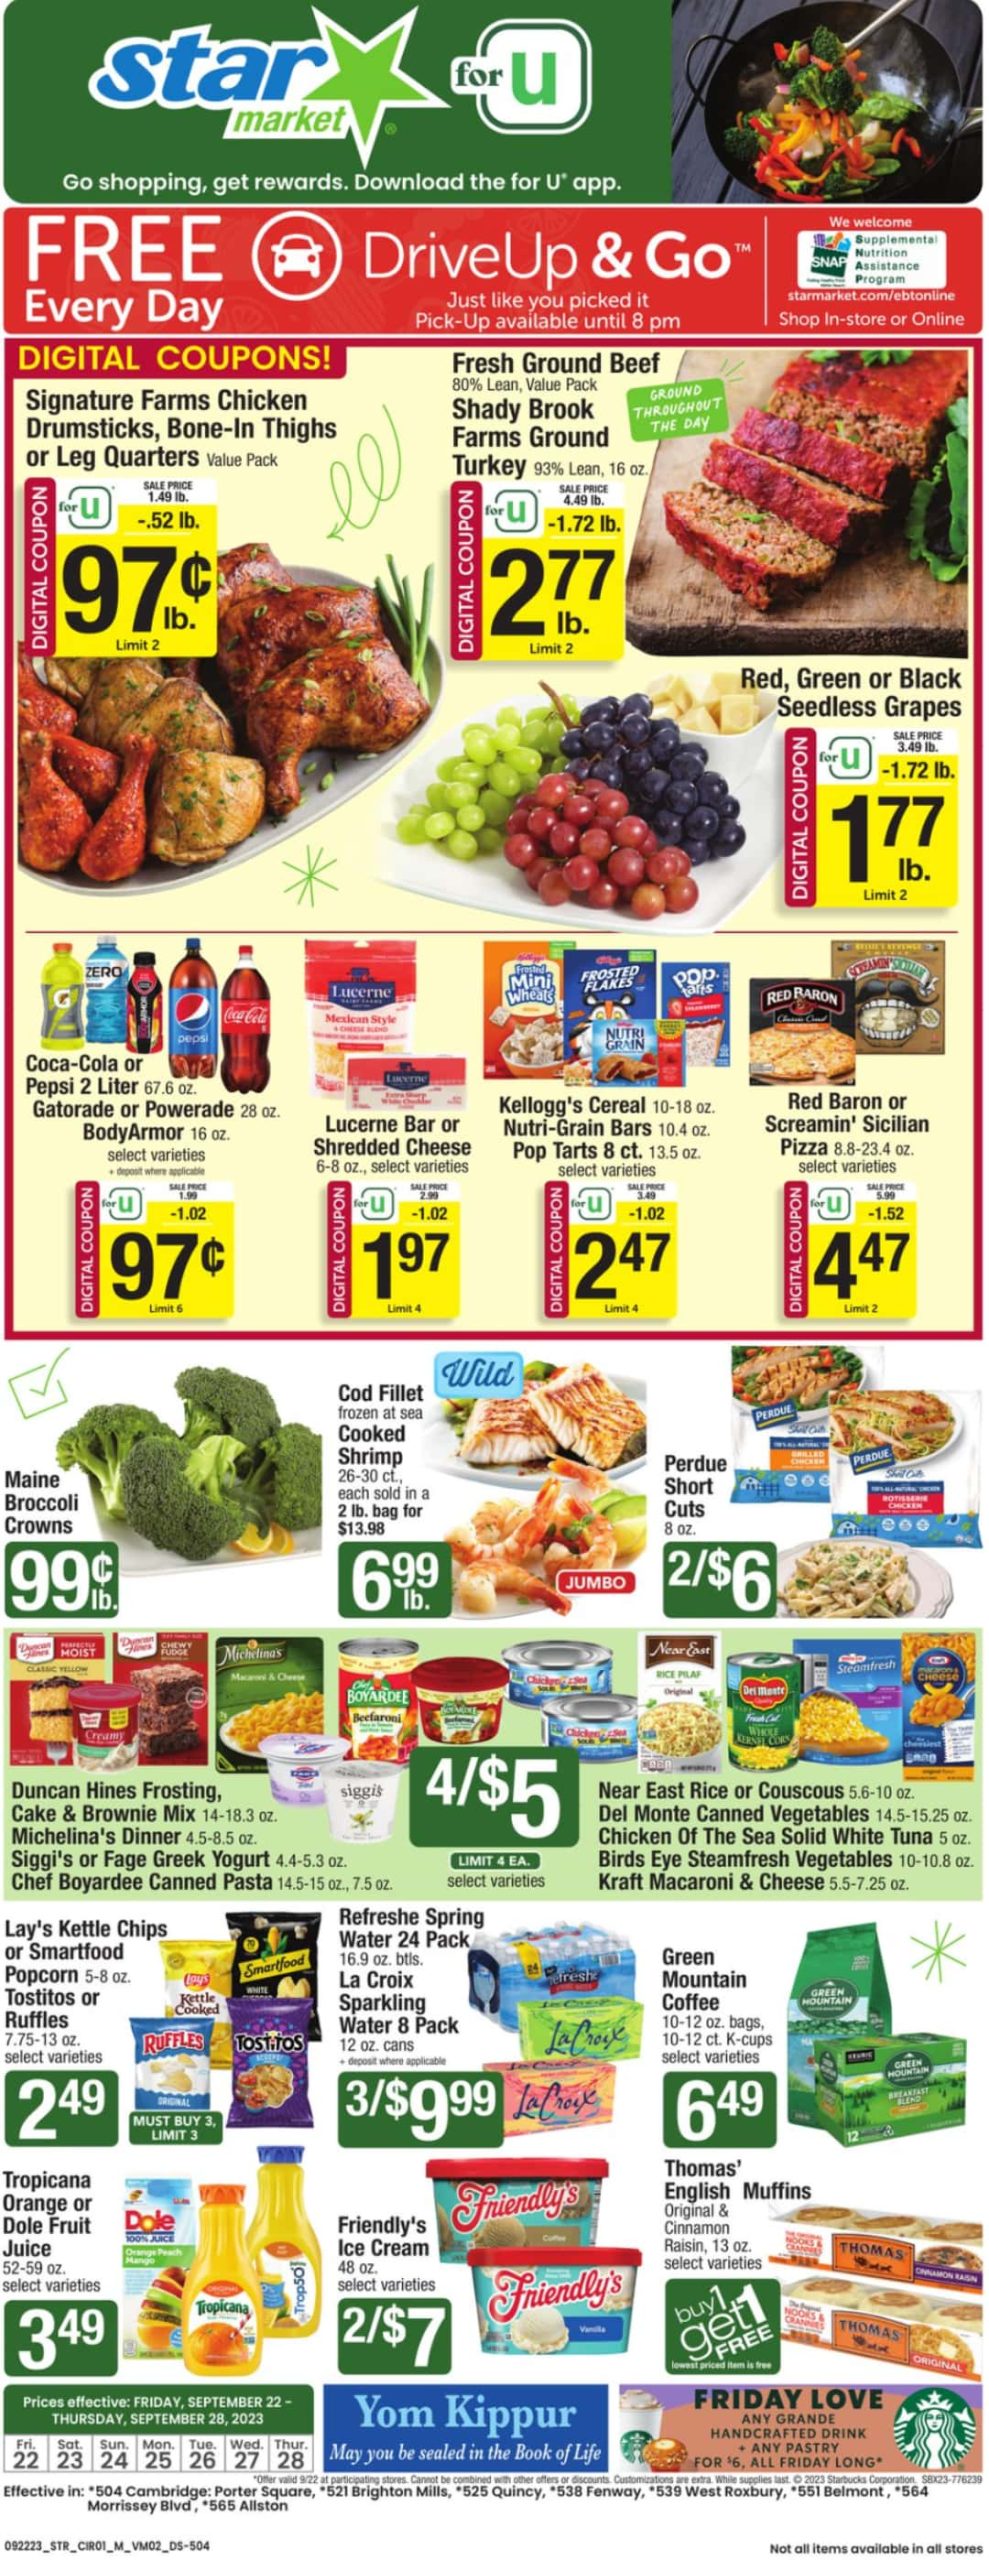 Star Market Weekly Ad May 27 to June 2, 2022 1 – star market ad 1 scaled